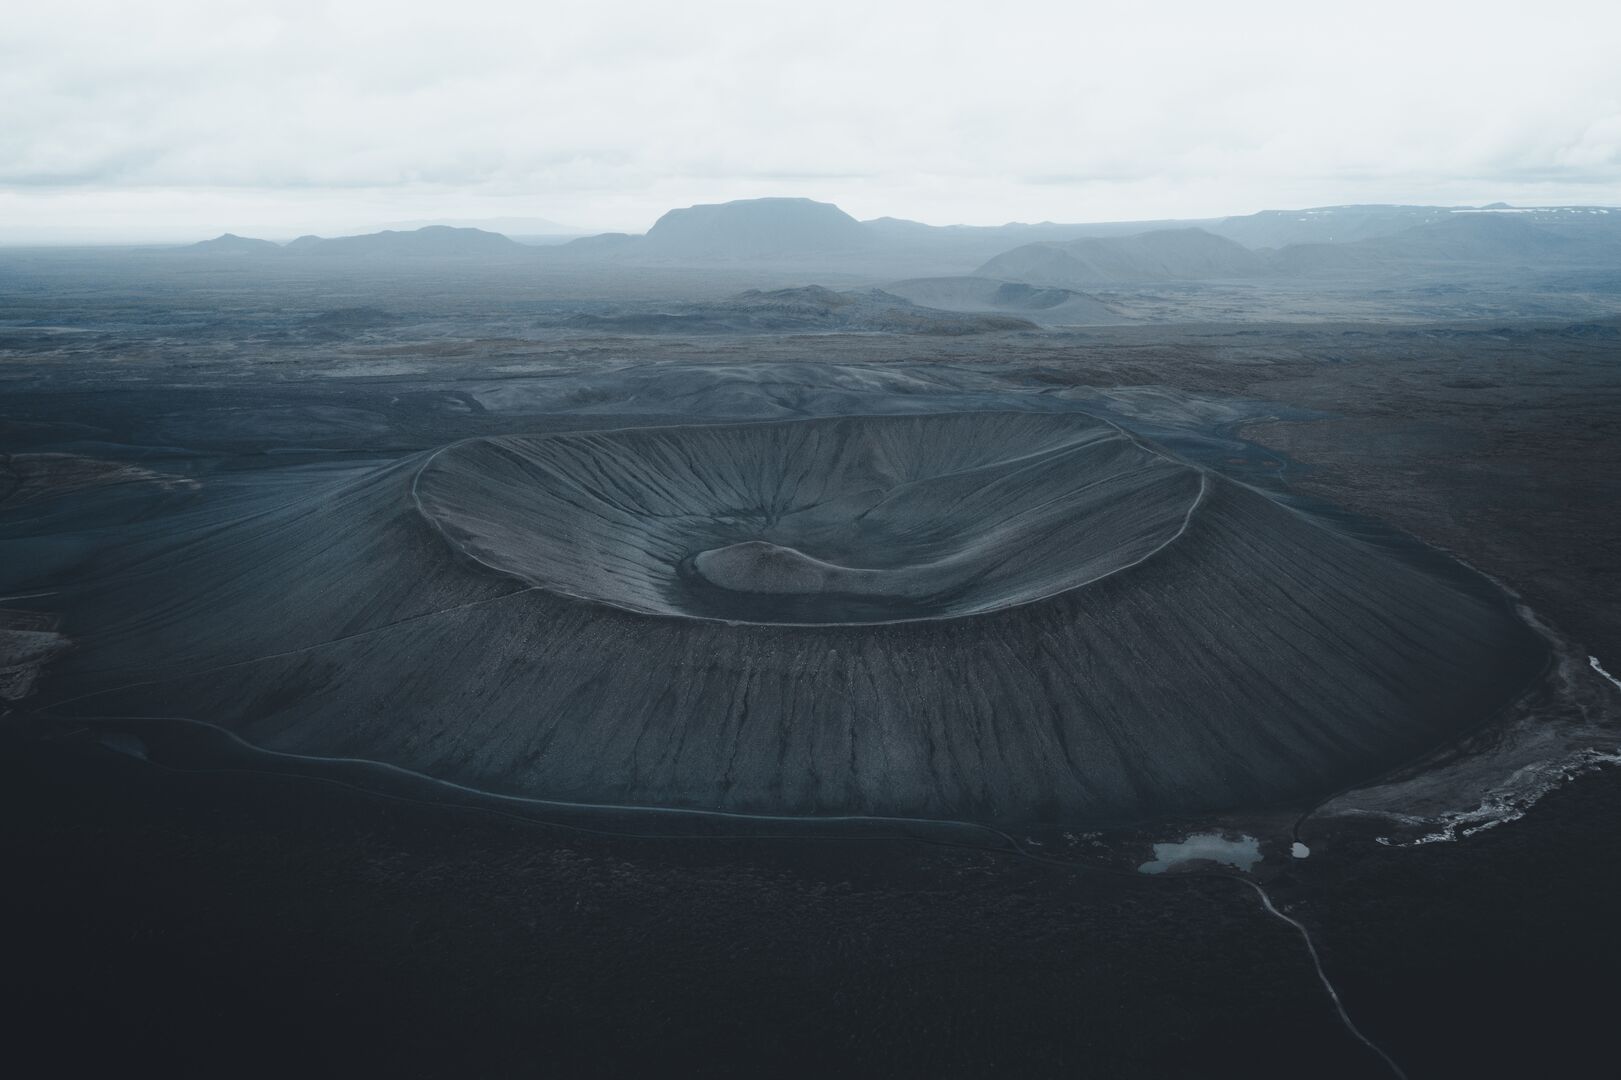 An aerial view of Hverfjall crater located close to Lake Myvatn in Iceland